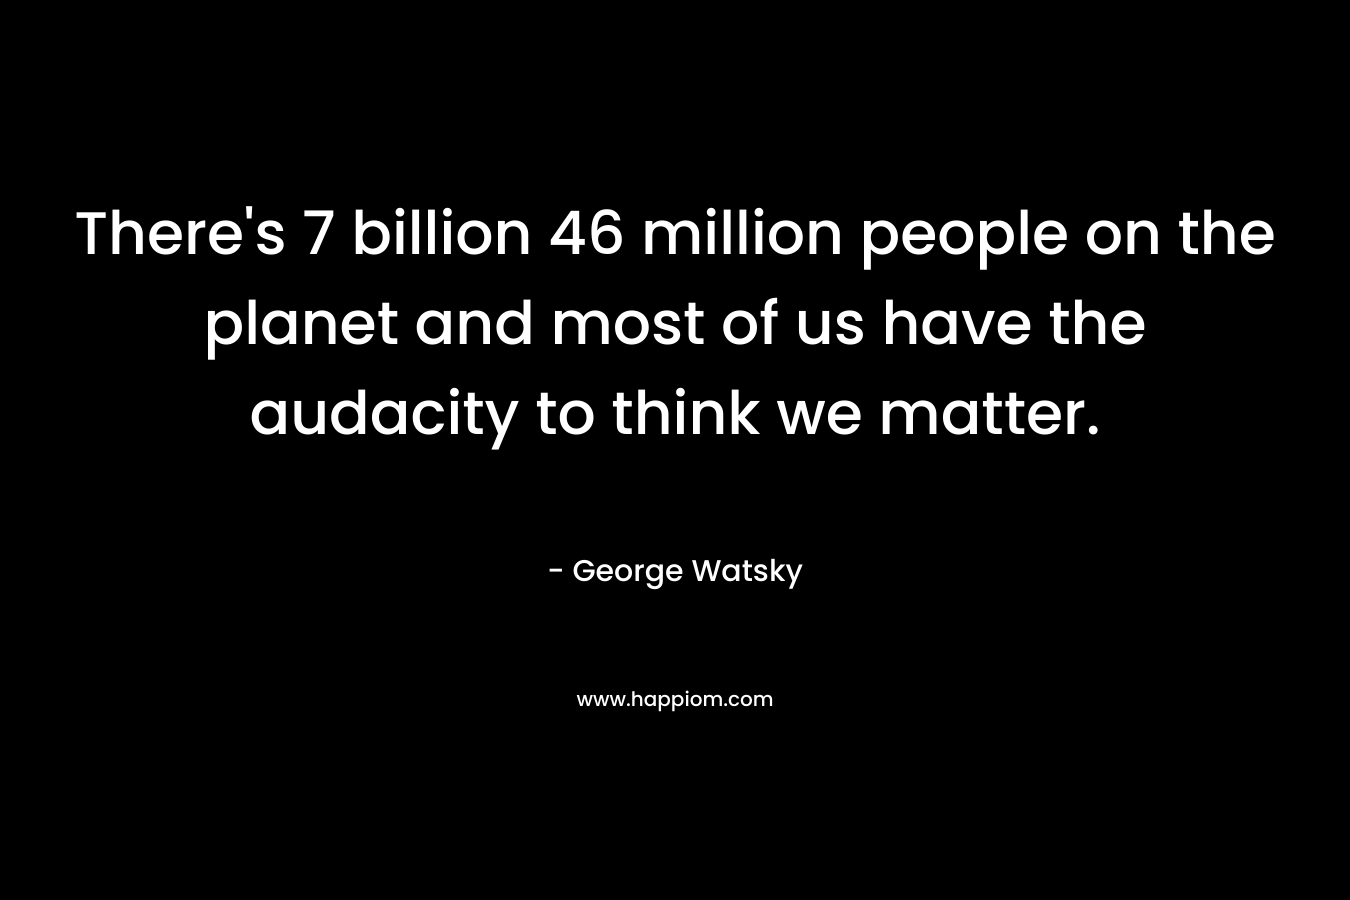 There's 7 billion 46 million people on the planet and most of us have the audacity to think we matter.